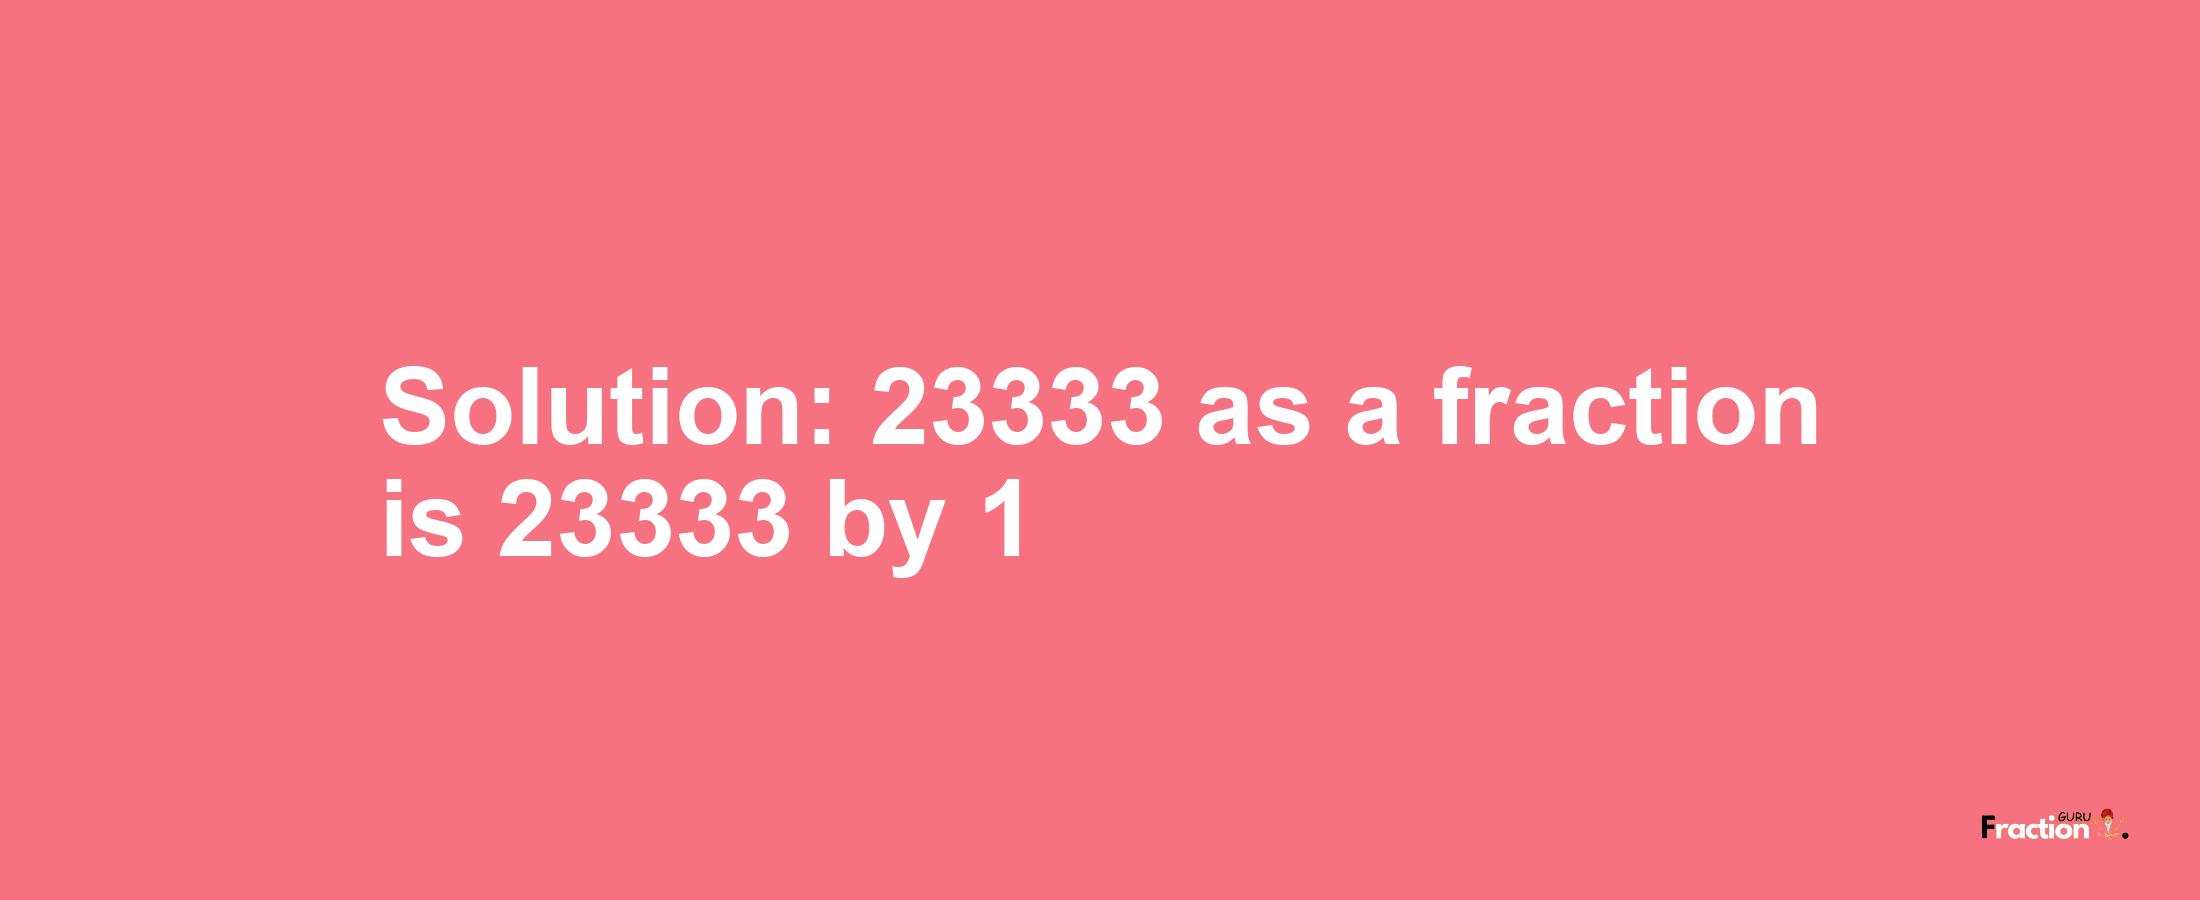 Solution:23333 as a fraction is 23333/1